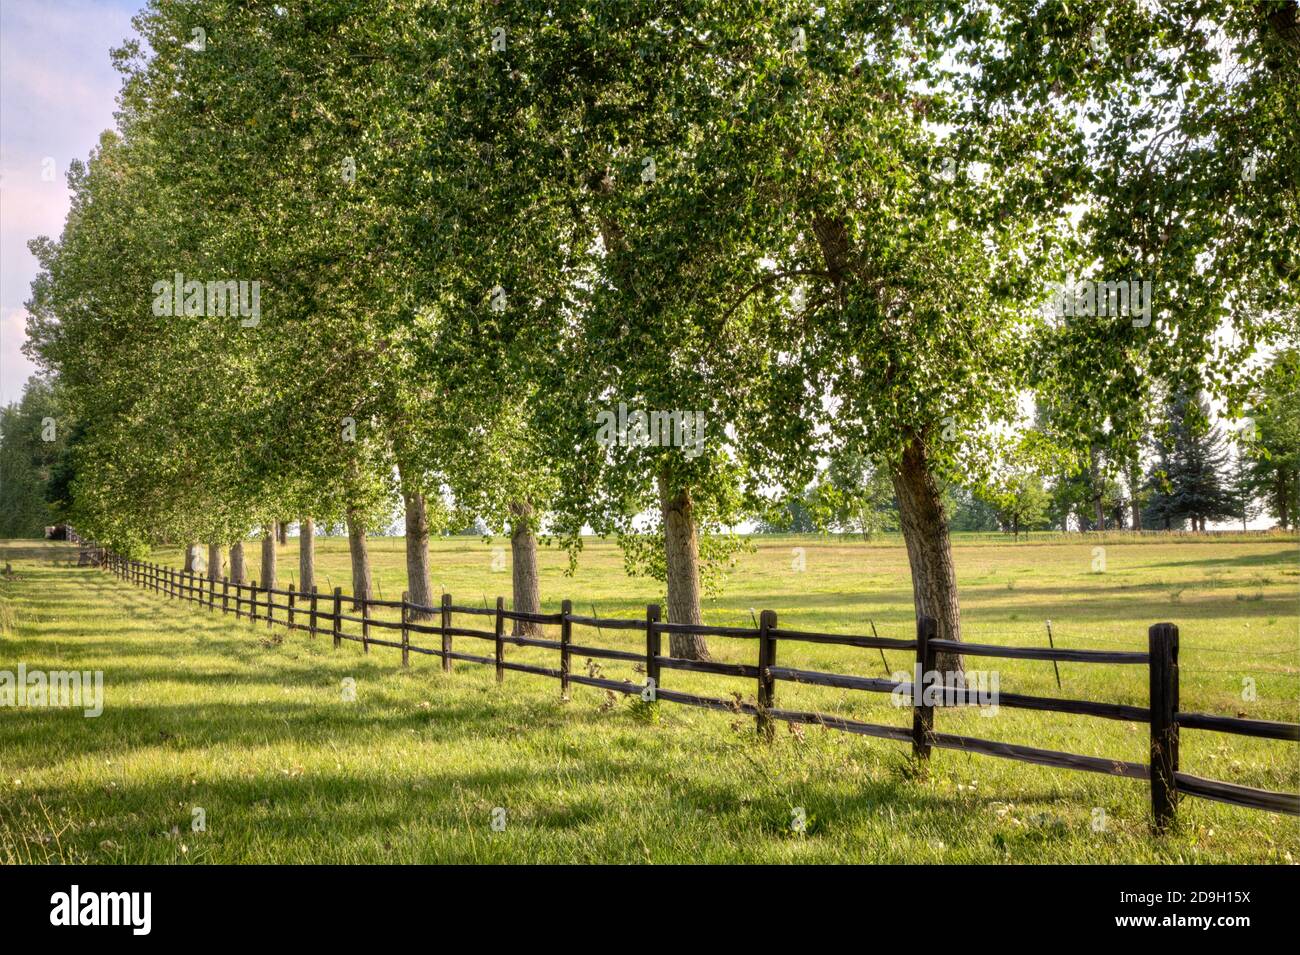 A rail fence borders a meadow in the late afternoon light backed by a tall row of Plains Cottonwood Trees all casting long shadows. Stock Photo